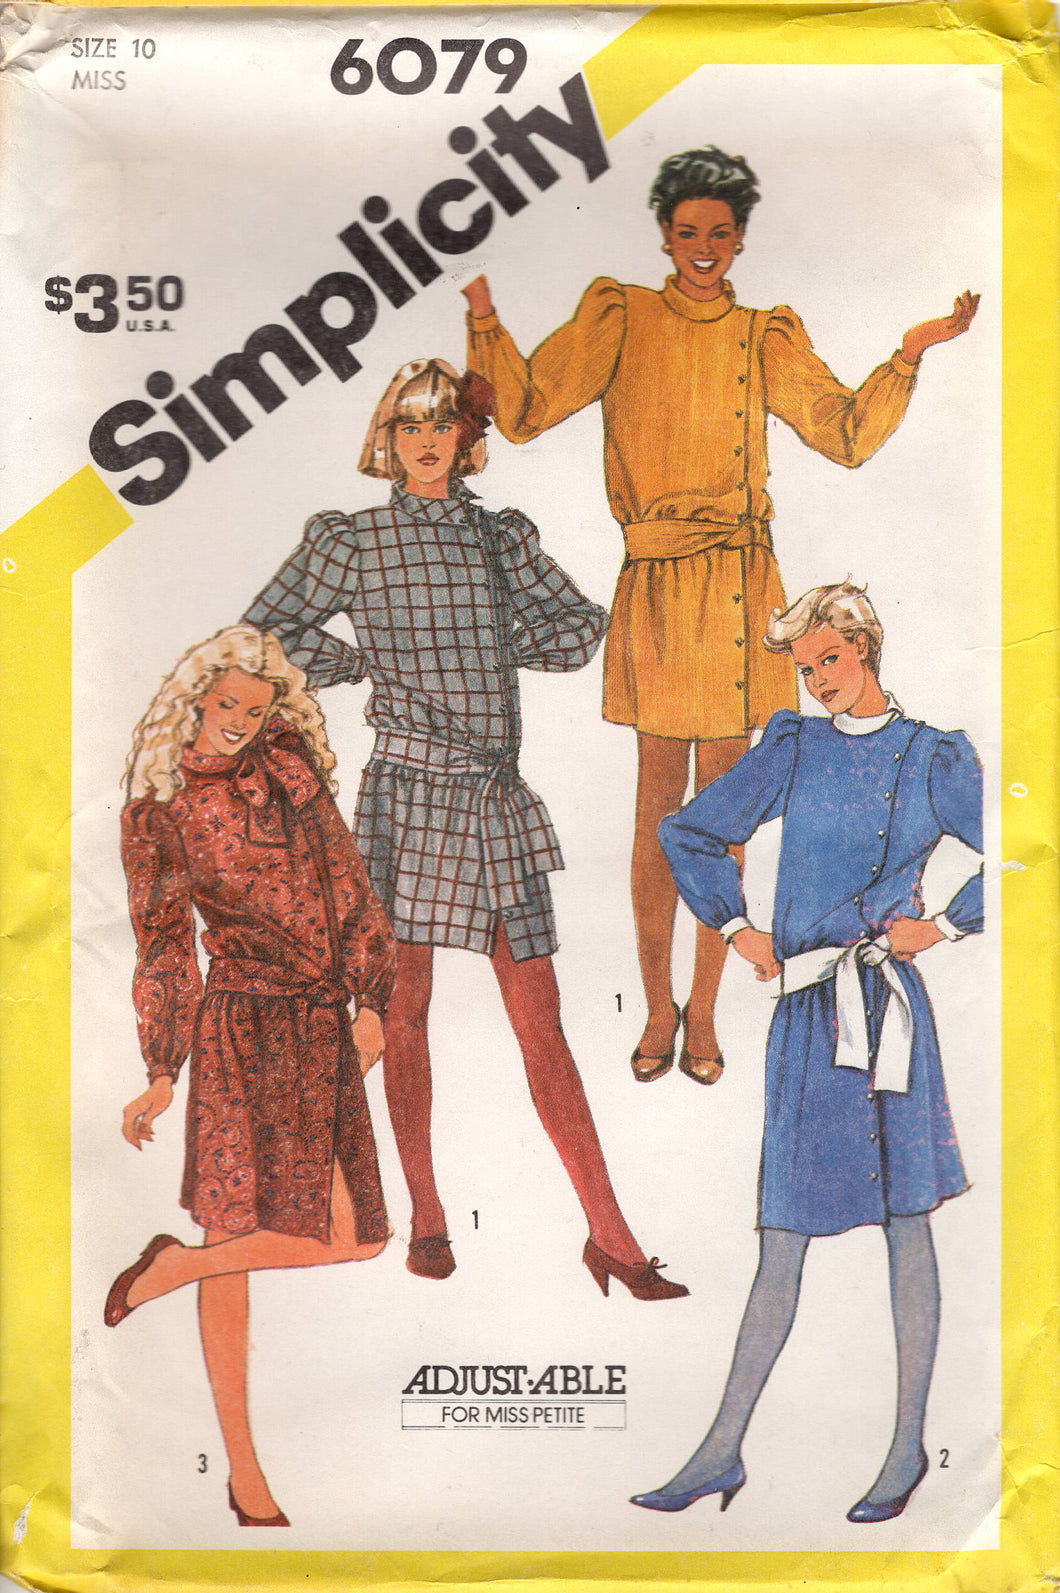 1980's Simplicity Asymmetrical Button Up Dress Pattern with Drop Waist and Bow Collar - Bust 32.5-34